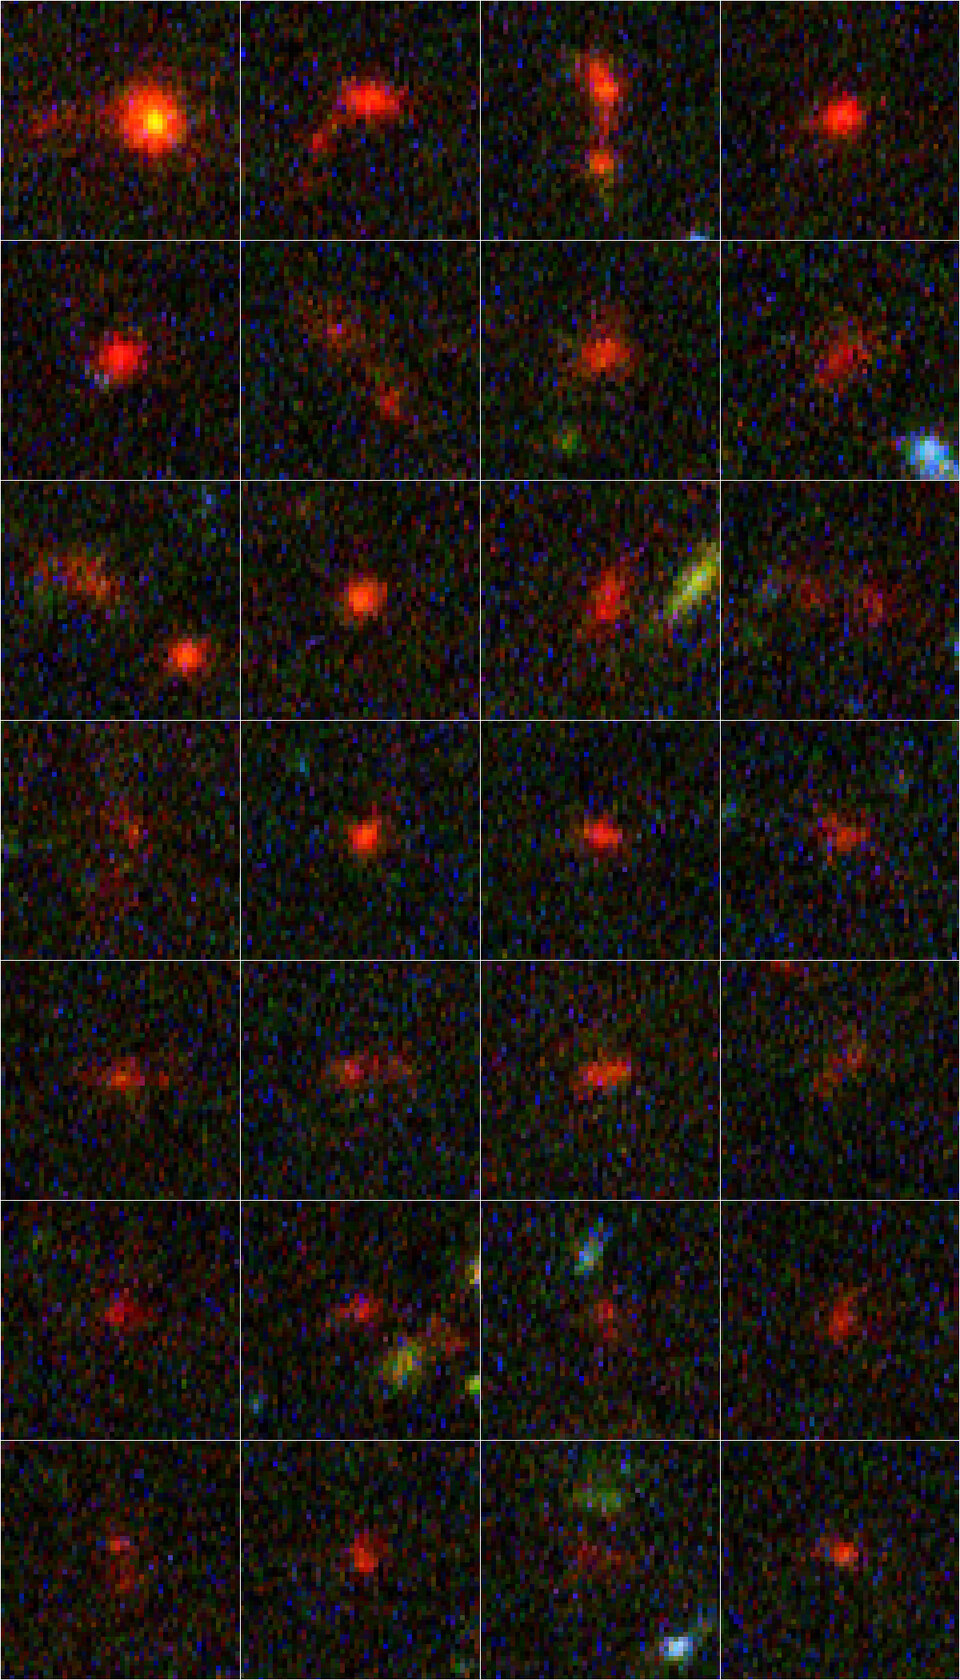 Details of individual distant galaxies